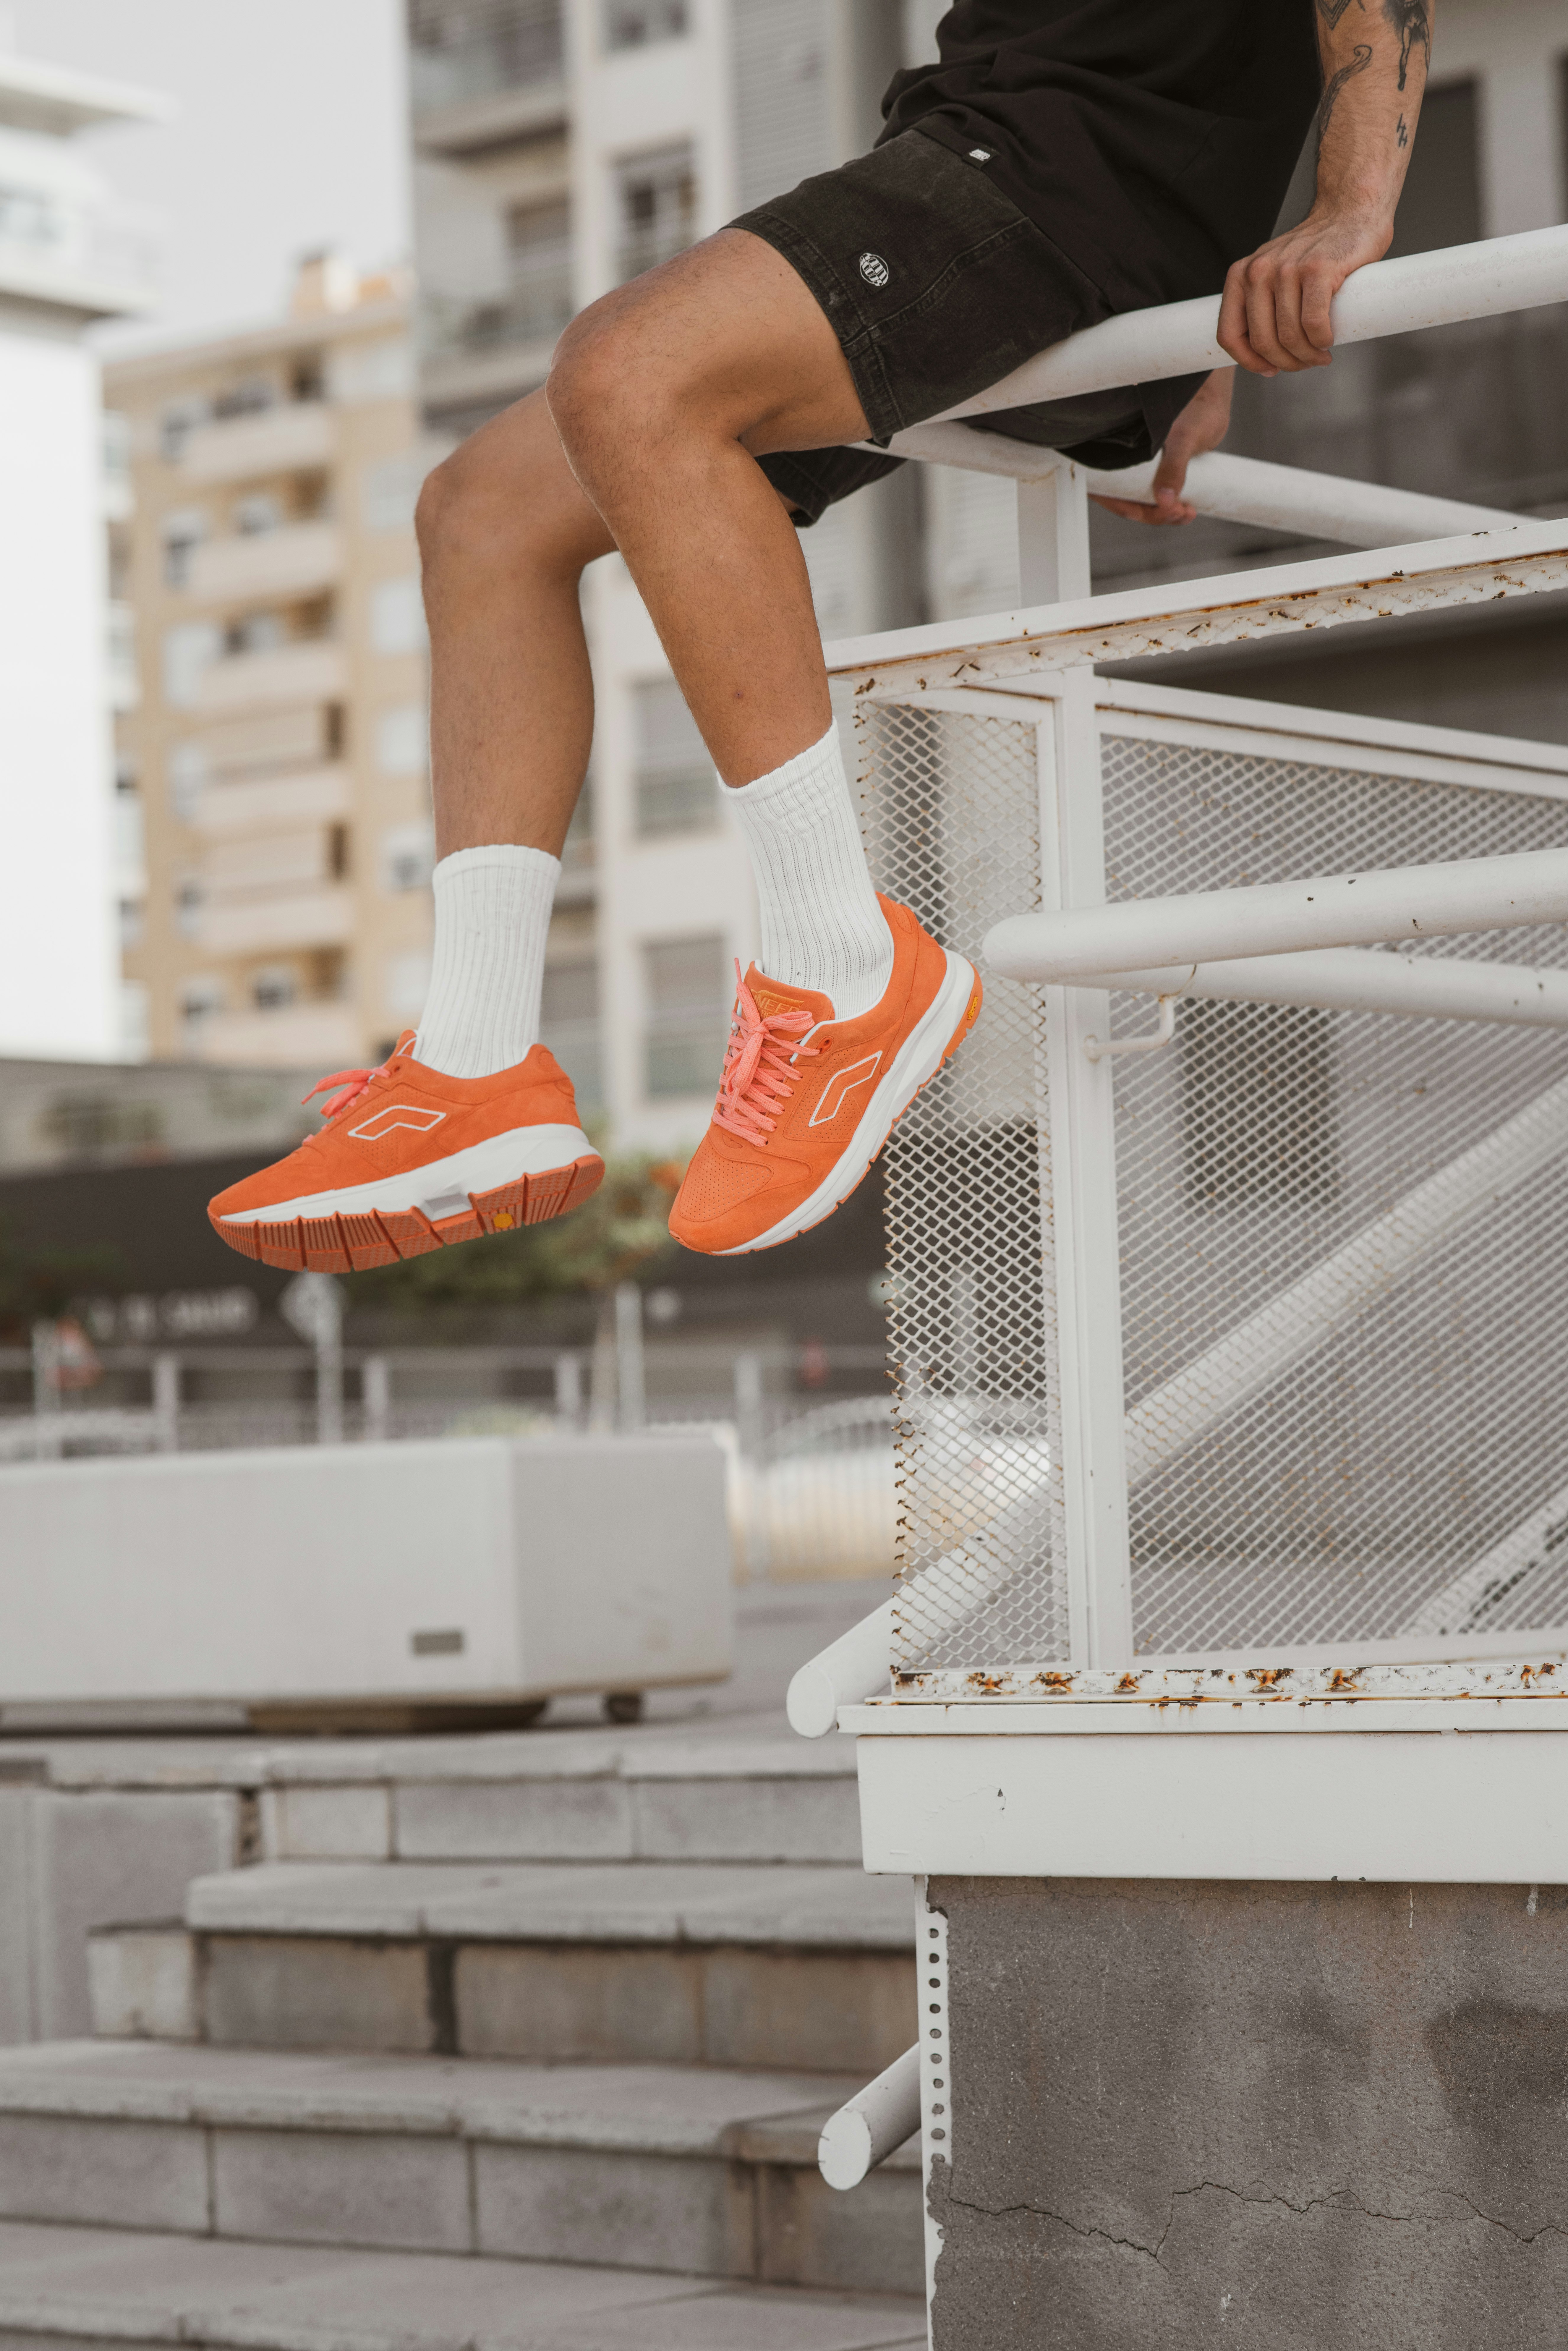 person in orange and white nike sneakers sitting on white metal railings